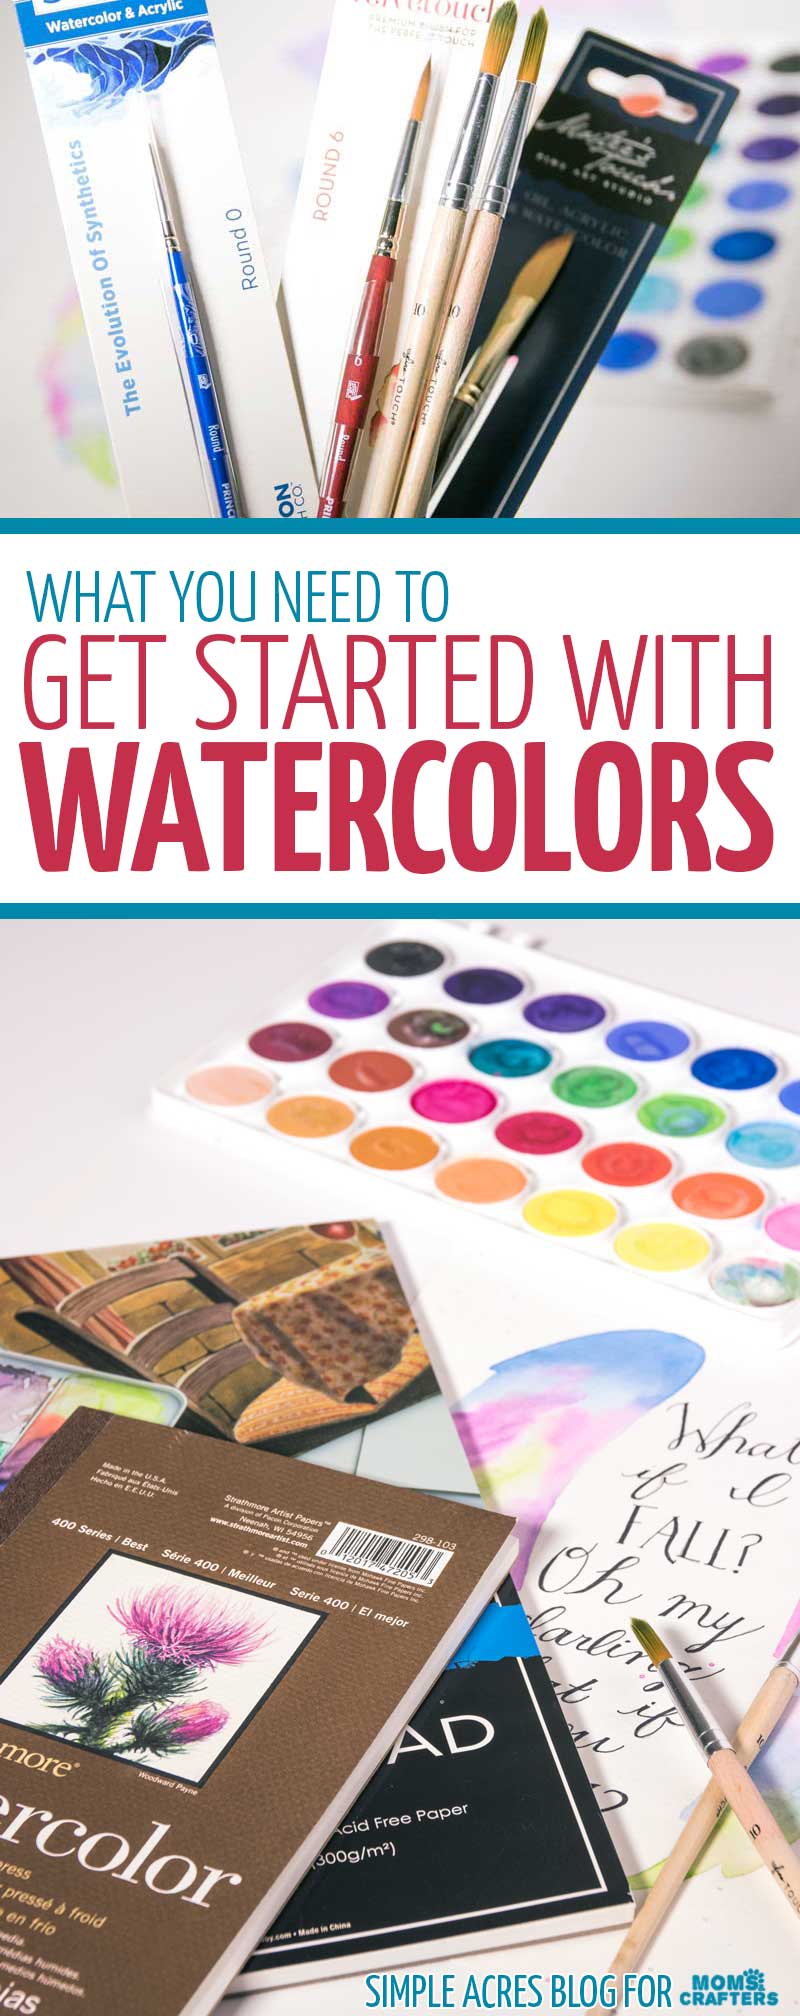 Watercolor Resist with Masking Fluid - Simple Acres Blog